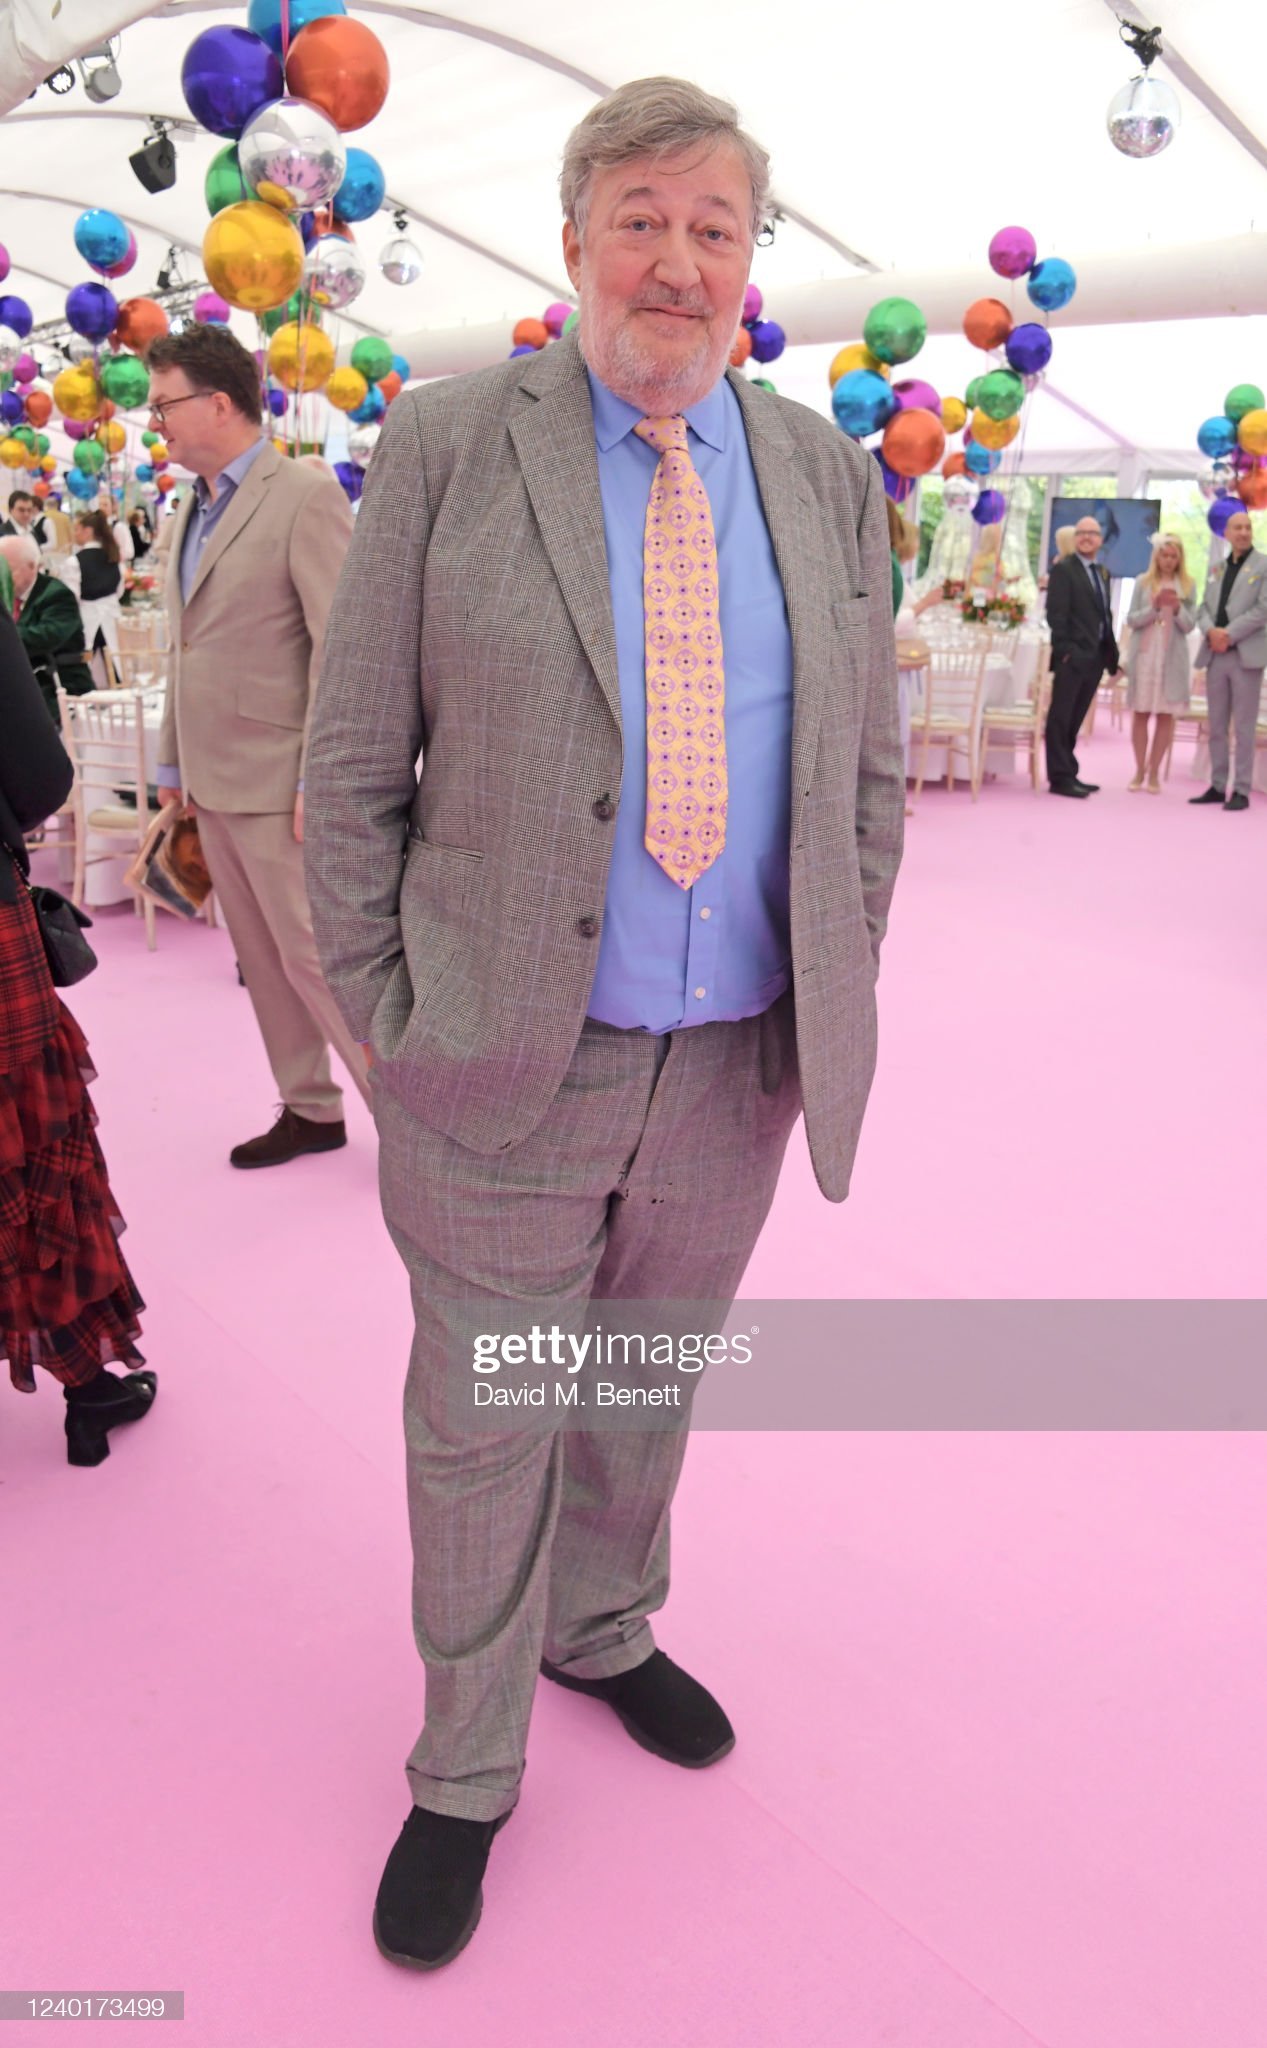 STRATFORD-UPON-AVON, ENGLAND - APRIL 23:  Stephen Fry attends Shakespeare's Birthday lunch presented by Pragnell and hosted by Alexander Armstrong in the grounds of the Royal Shakespeare Company on April 23, 2022 in Stratford-upon-Avon, England. (Photo by David M. Benett/Dave Benett/Getty Images for George Pragnell LTD)